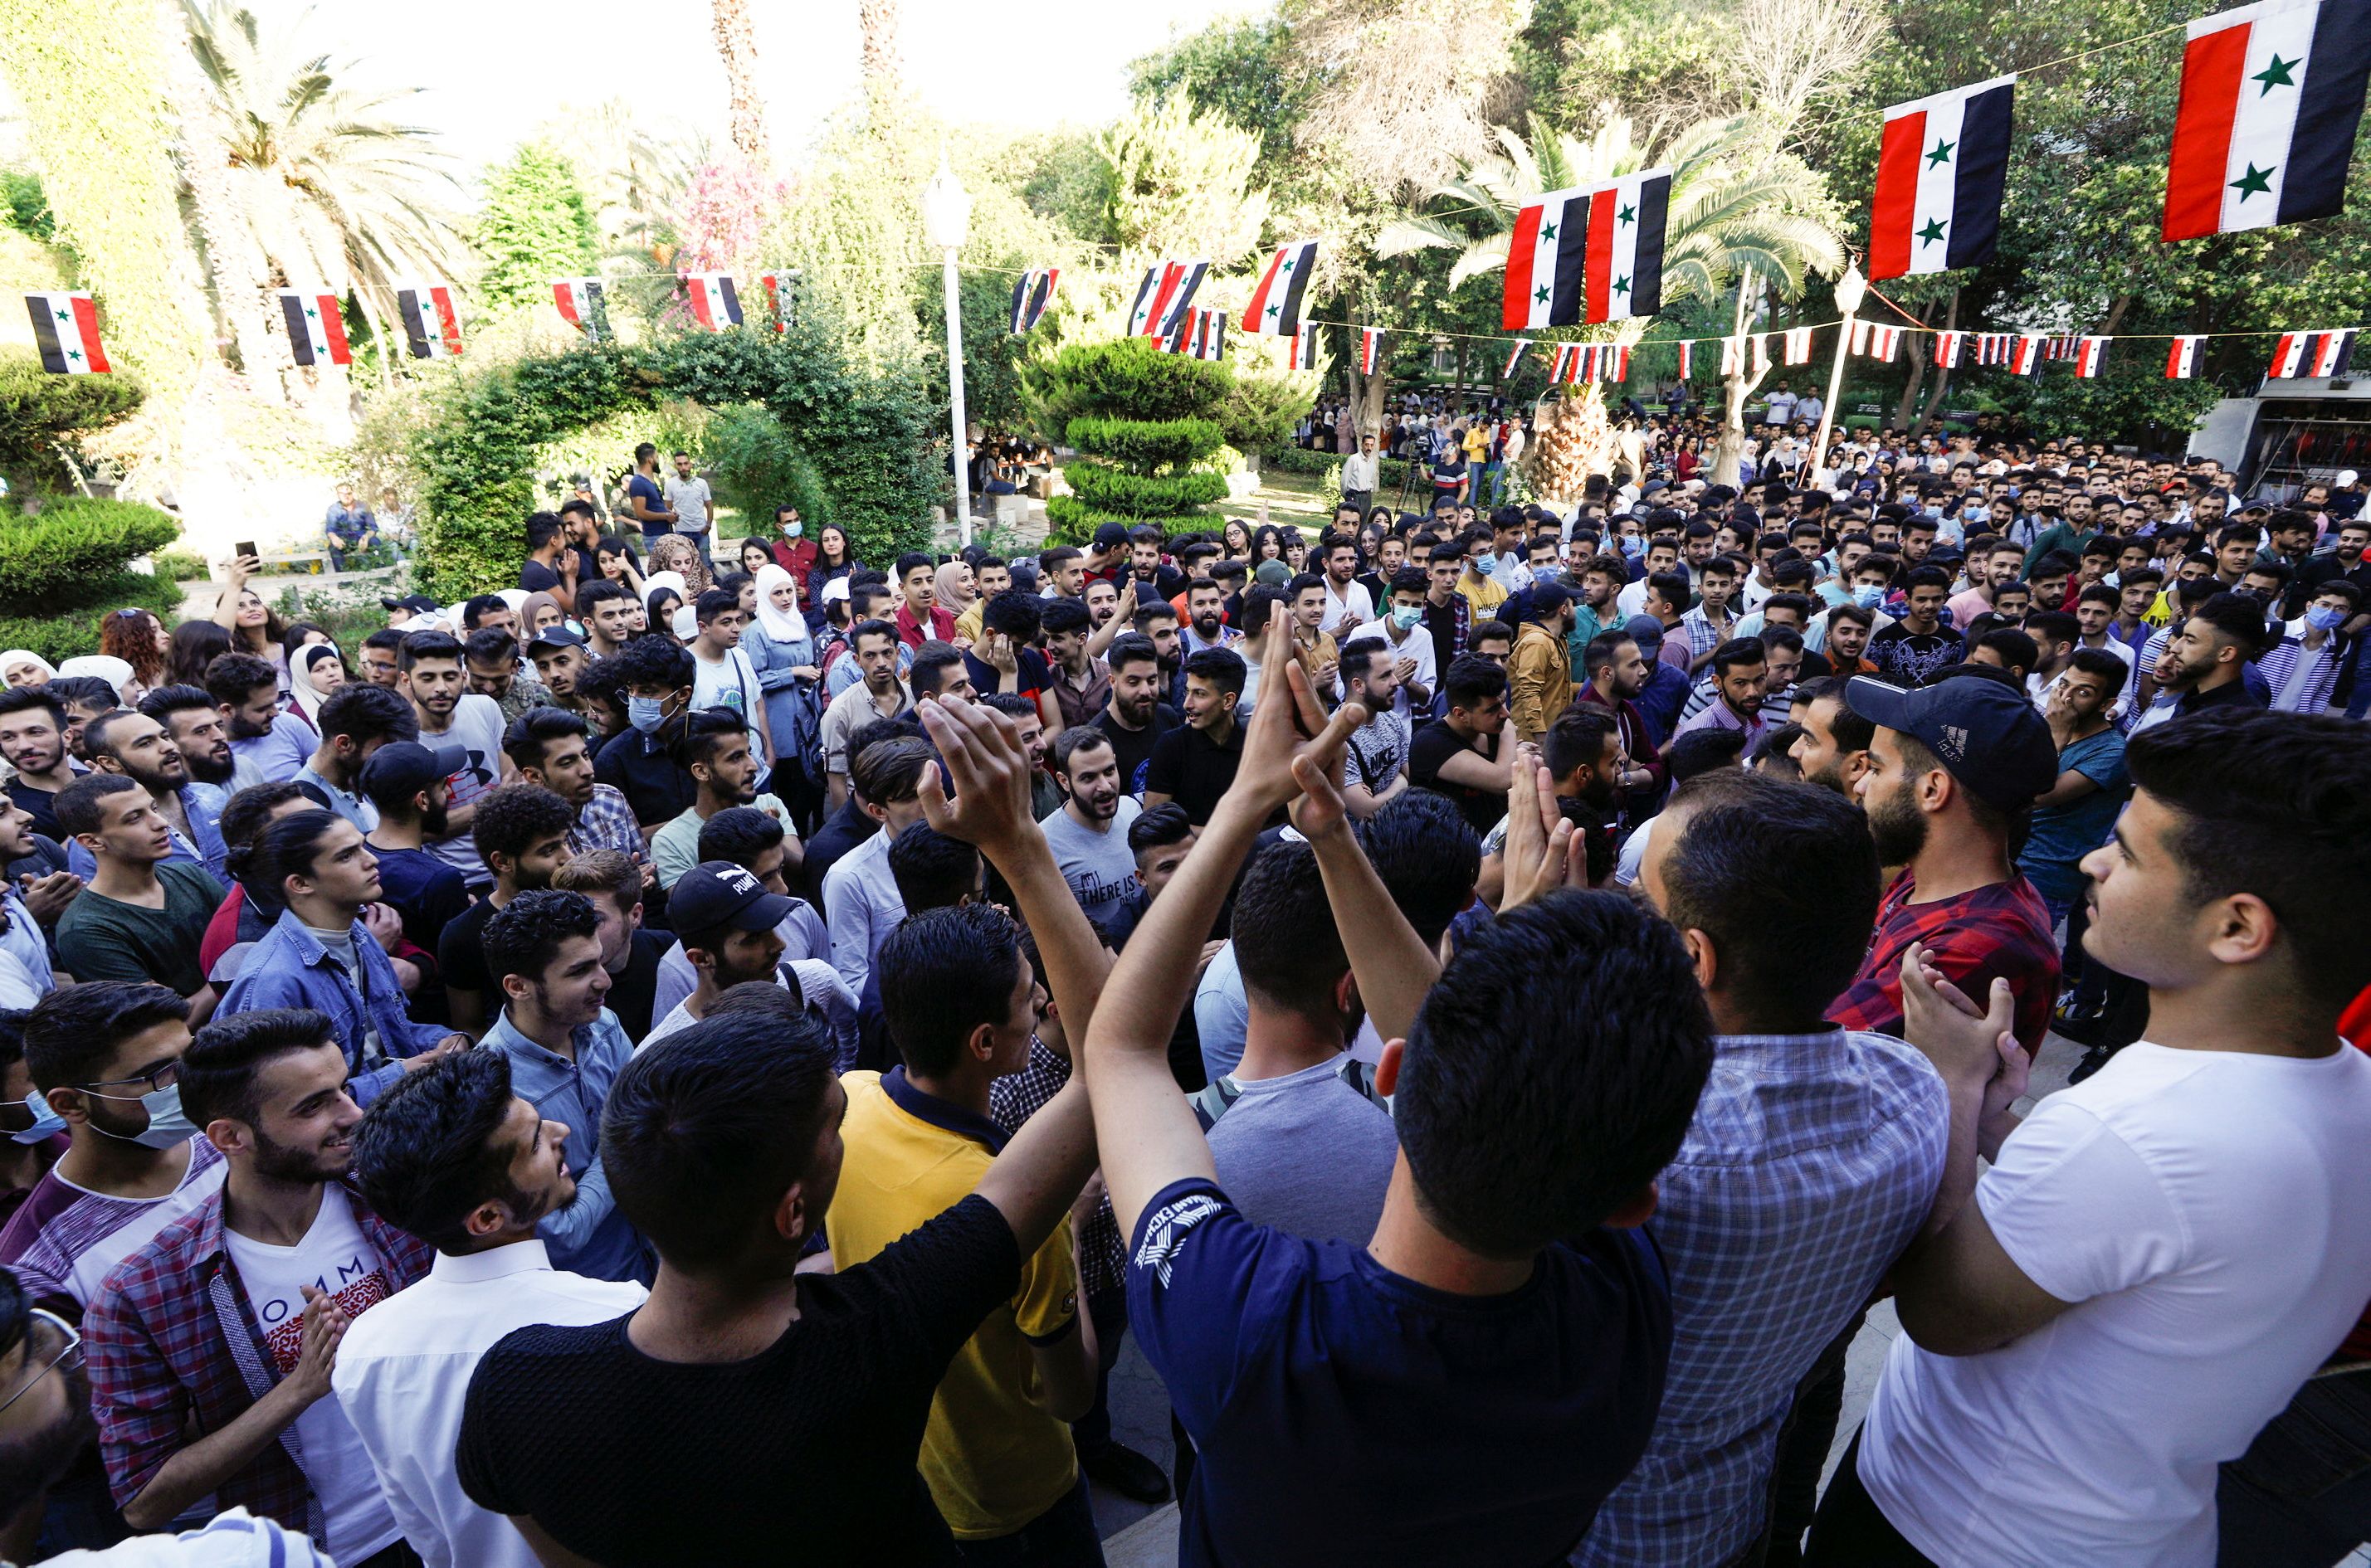 Students gesture as they wait outside a polling station before the polls open for the presidential elections, in Damascus